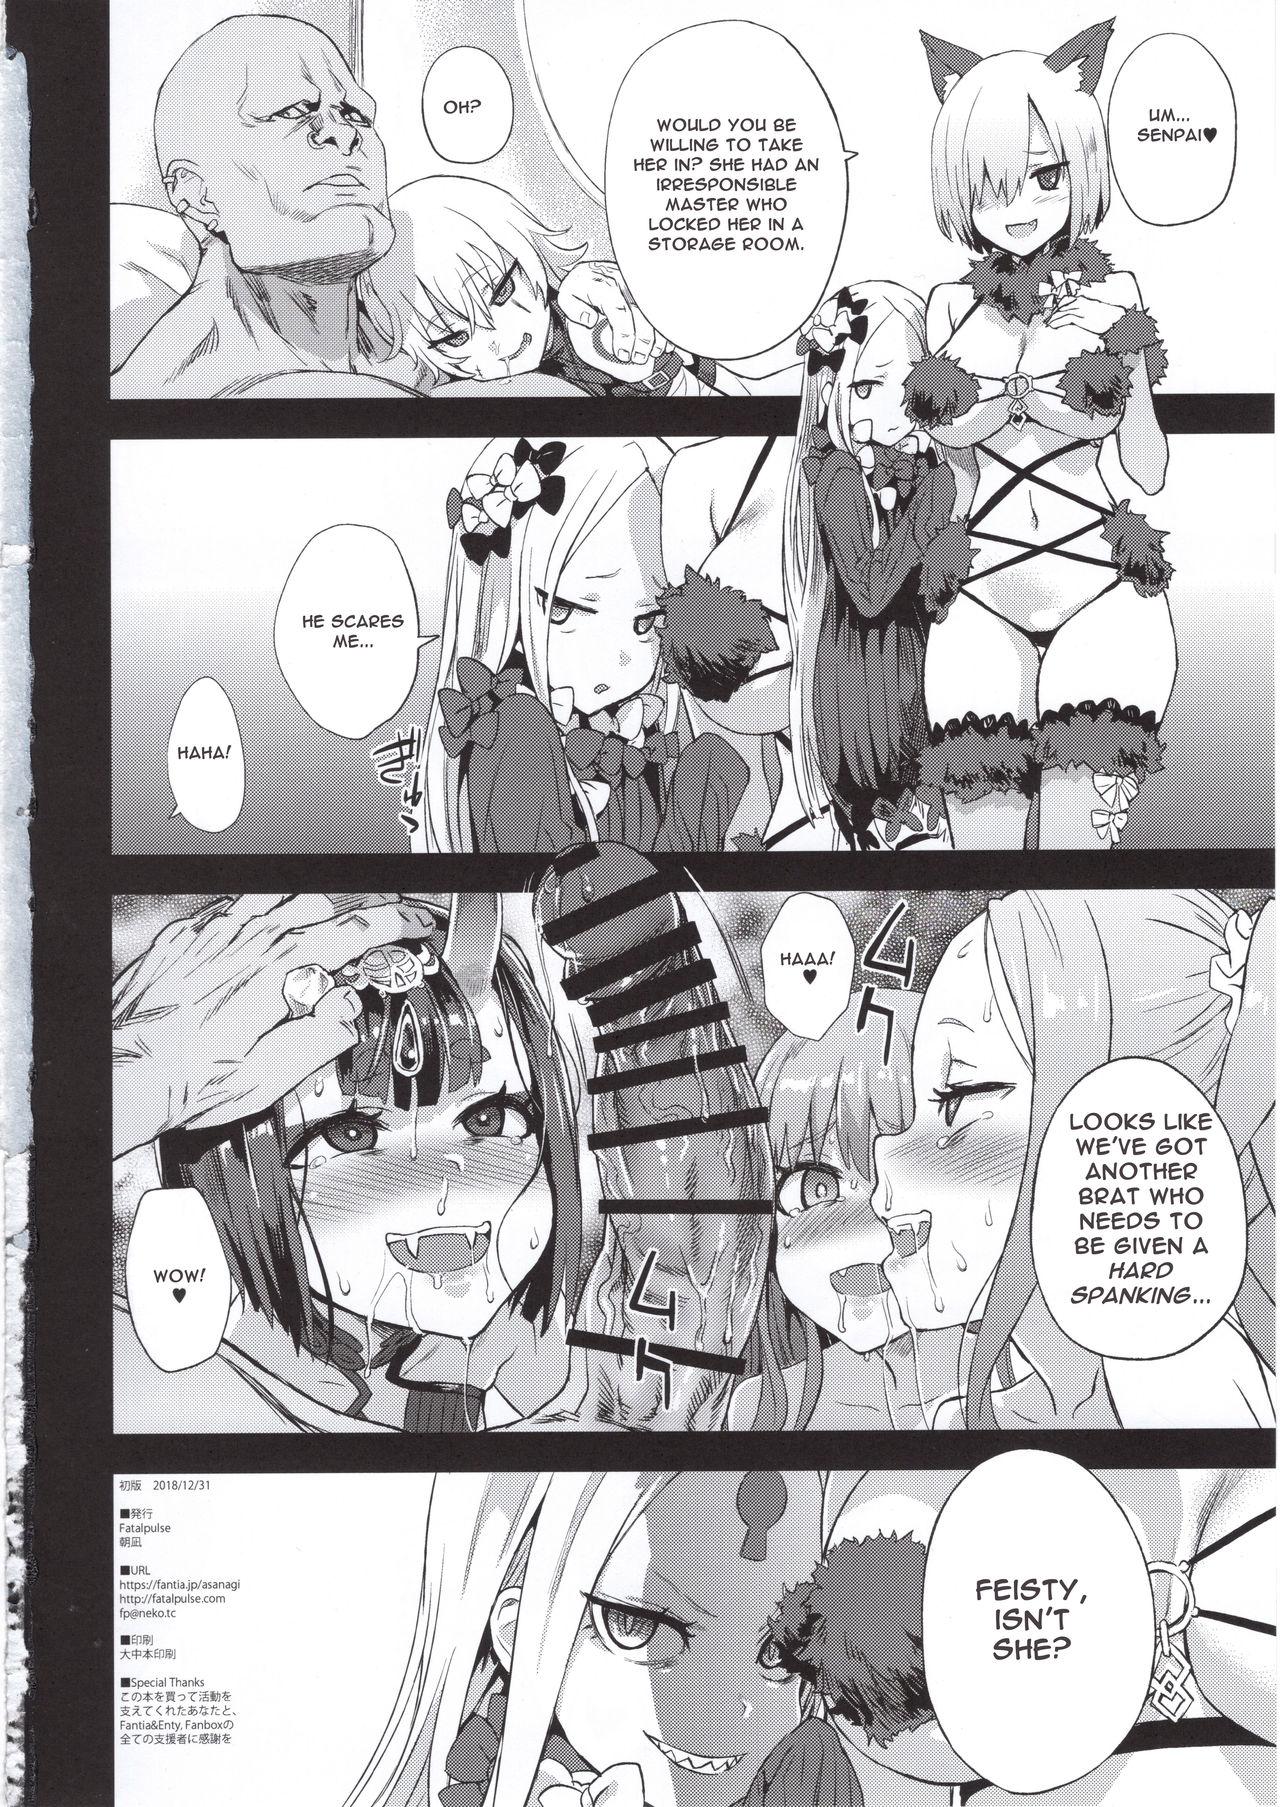 Old Vs Young VictimGirls26 master-vs mesu child - Fate grand order Flashing - Page 29